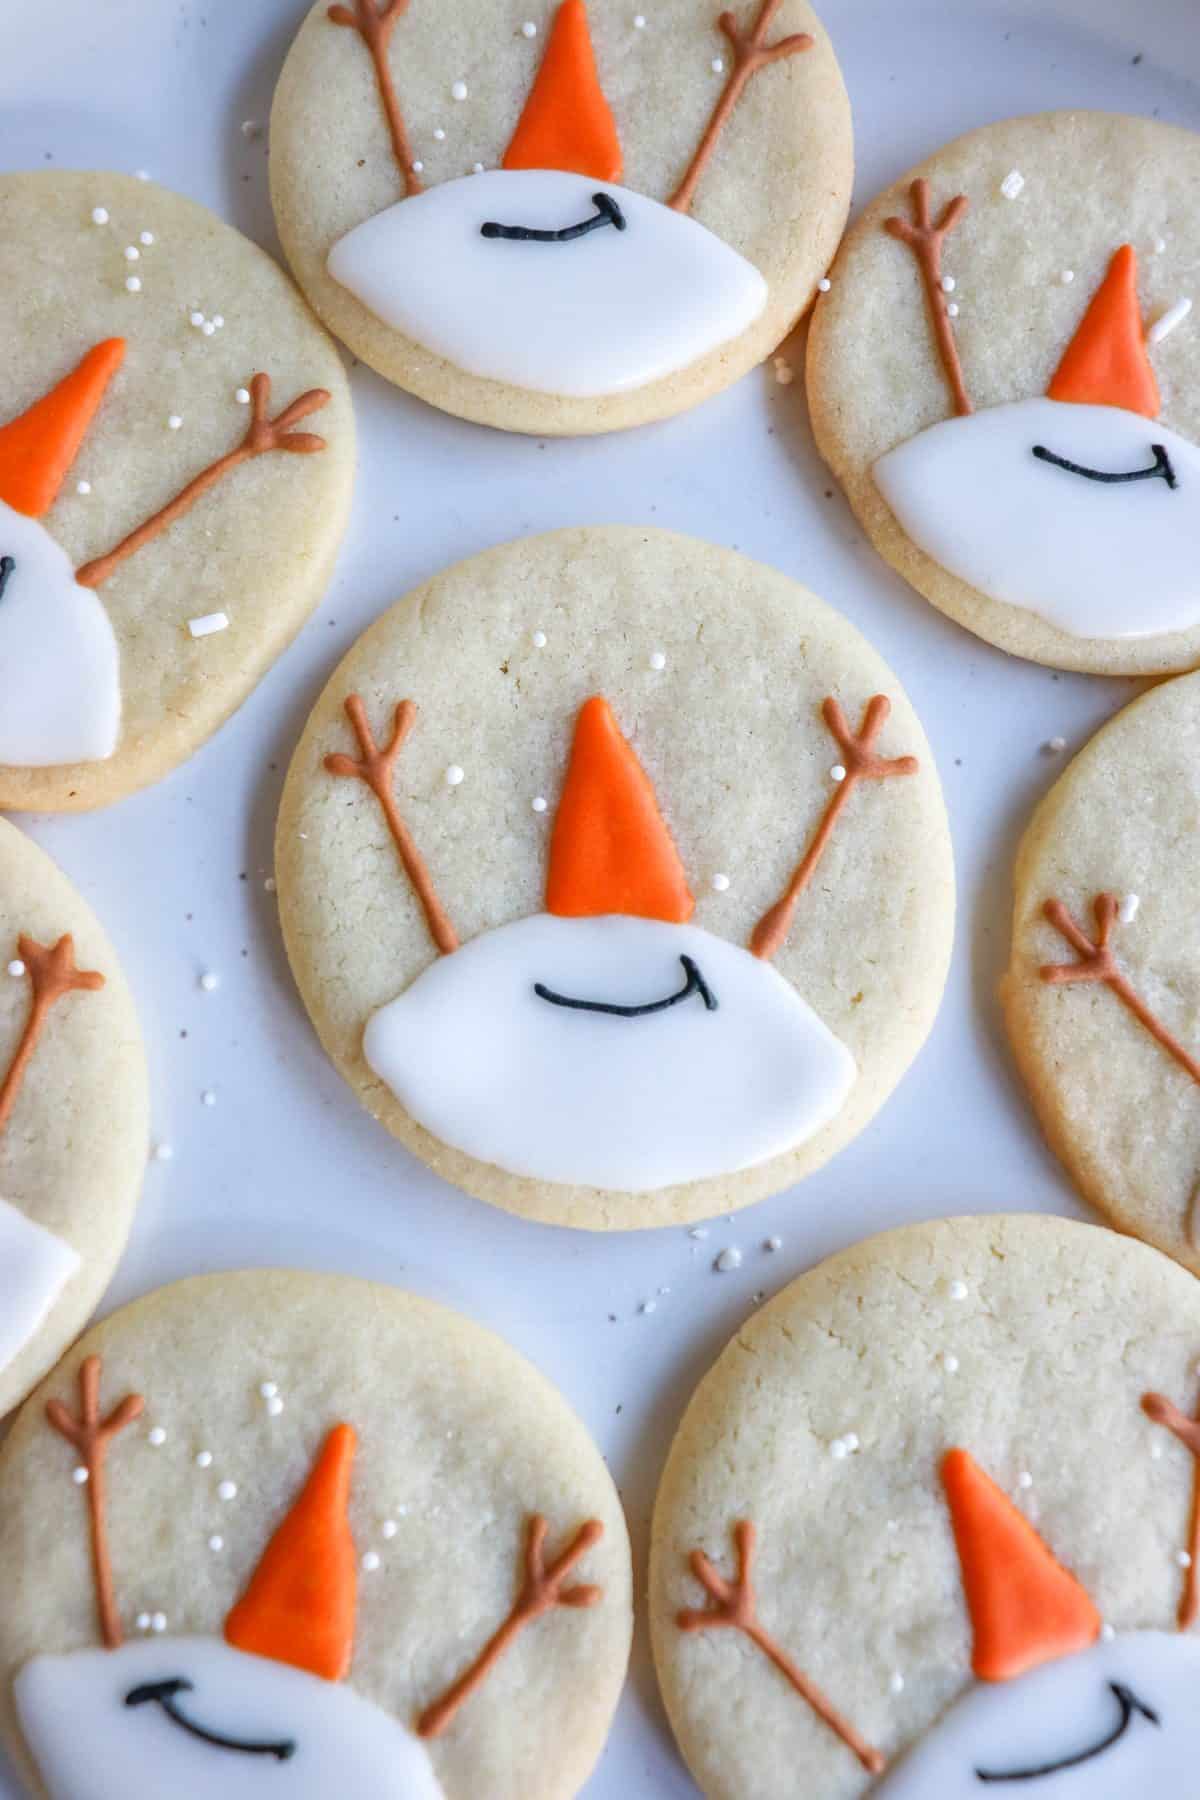 Easy Snowman Cookie Decorating